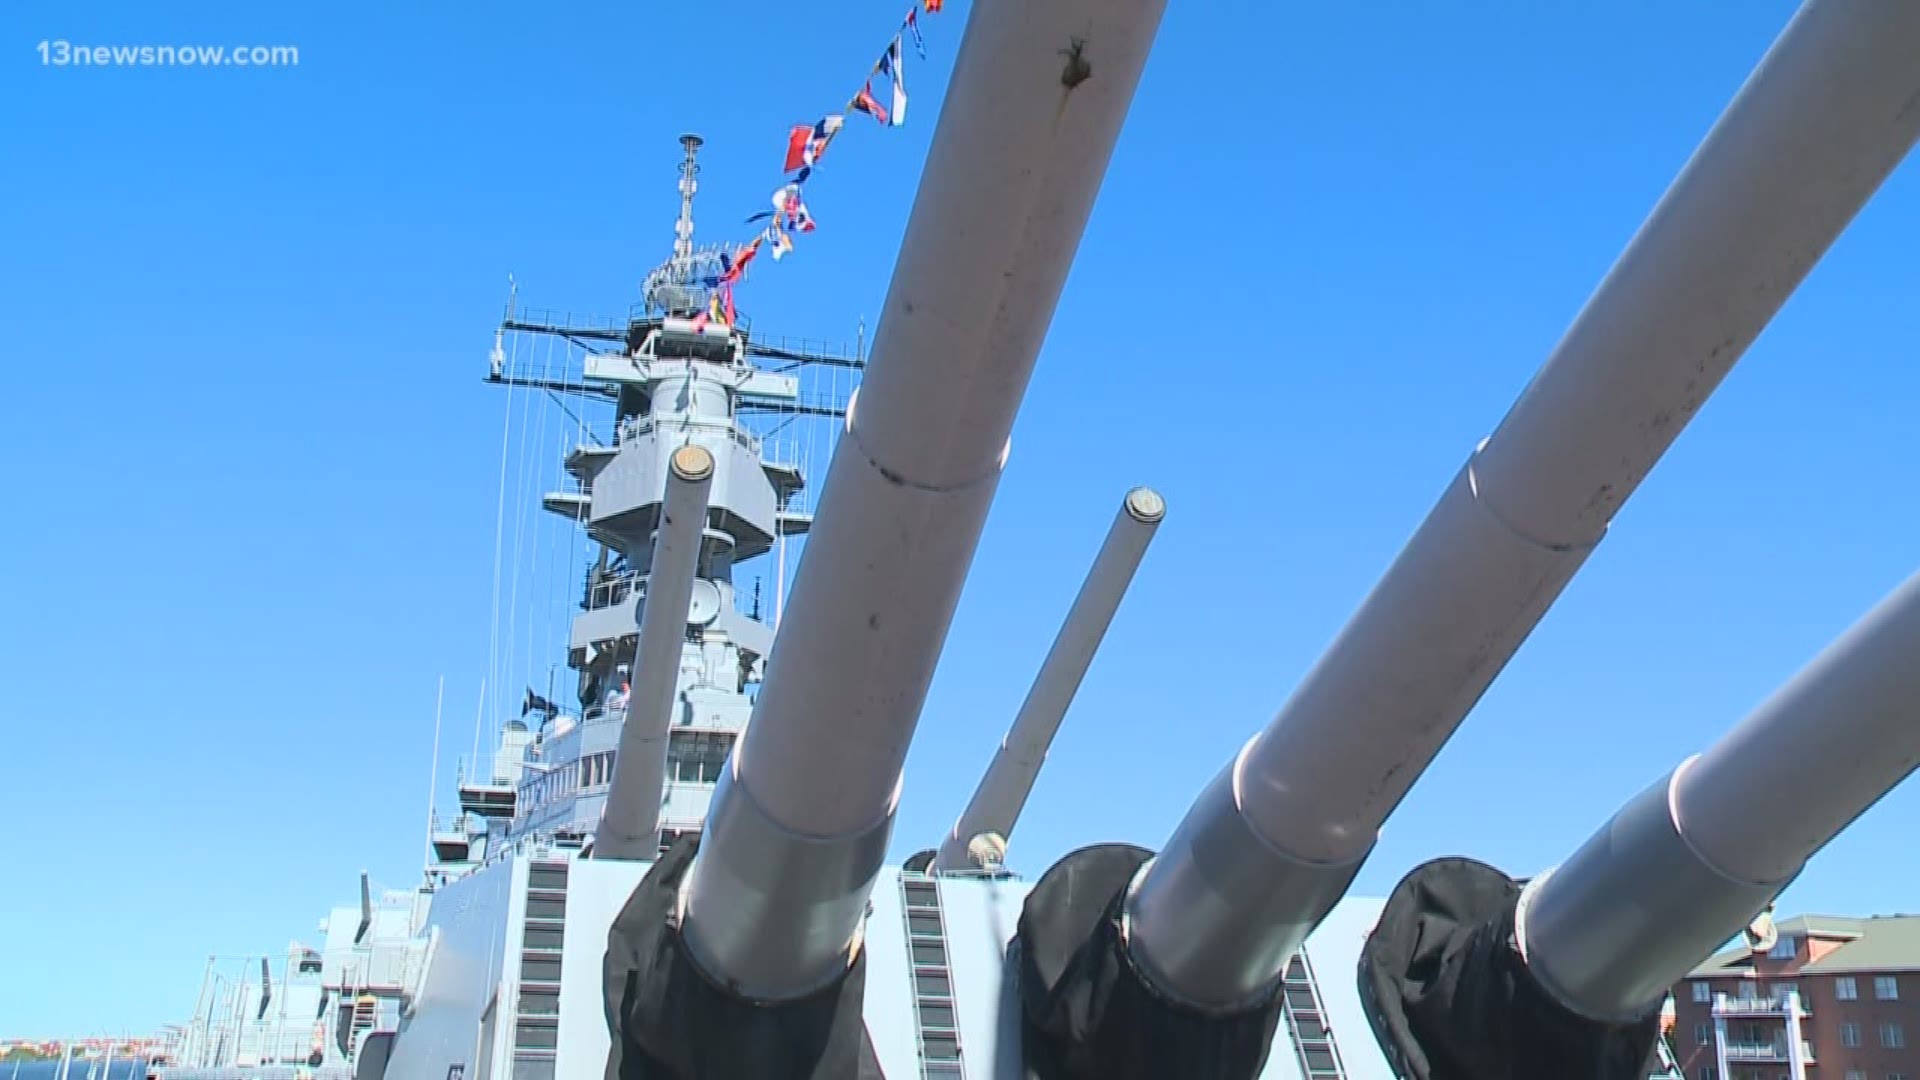 Battleship Wisconsin was commissioned on April 16, 1944. A special ceremony was held Tuesday at Nauticus.